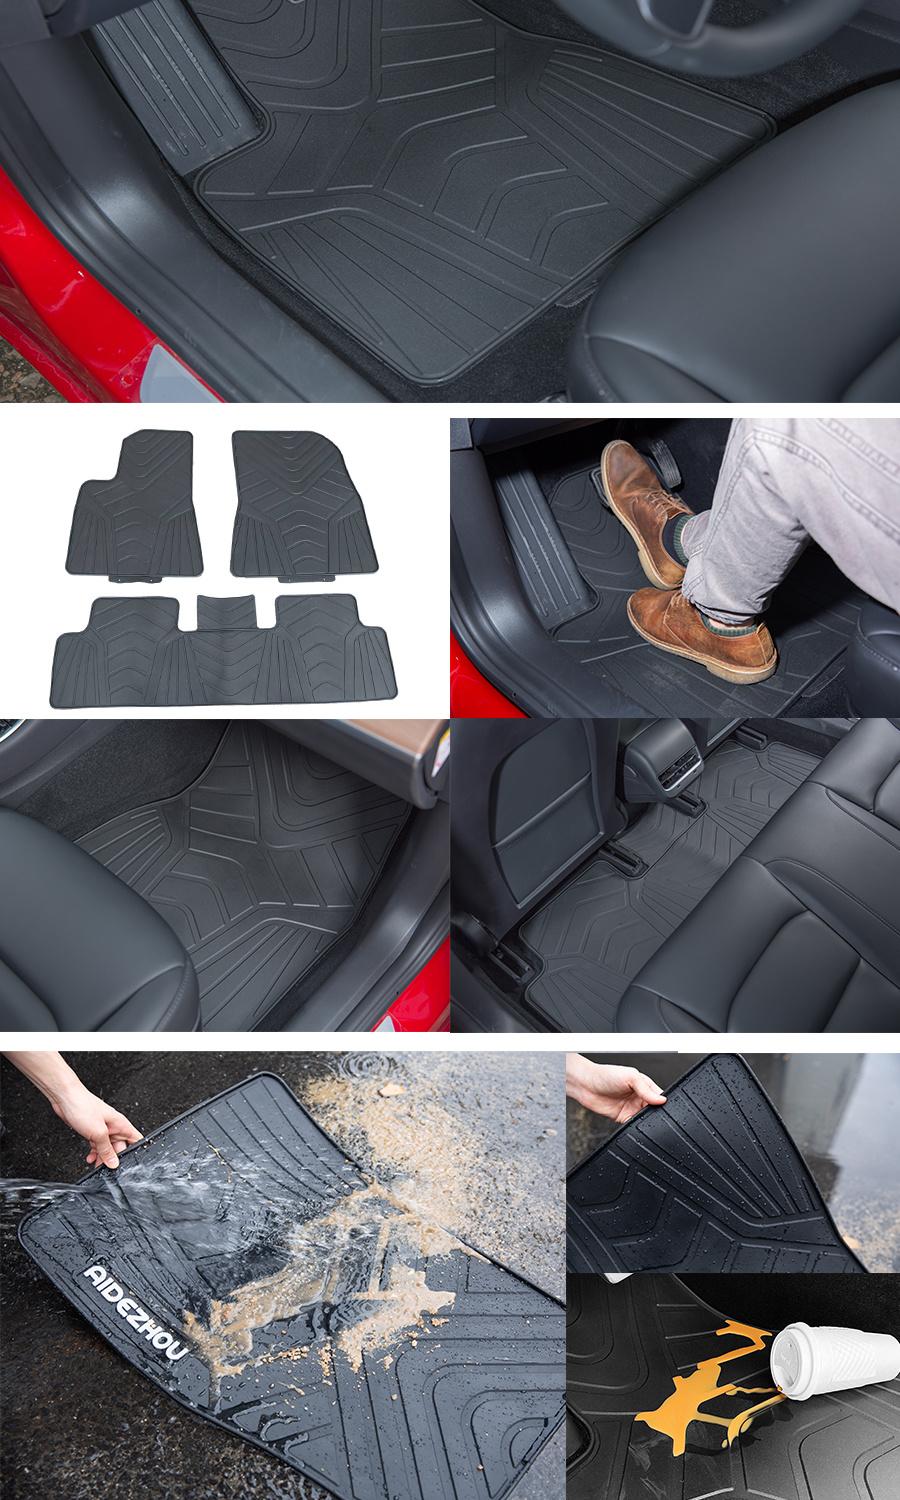 Custom Fit All Weather Car Floor Mats for Ford Focus